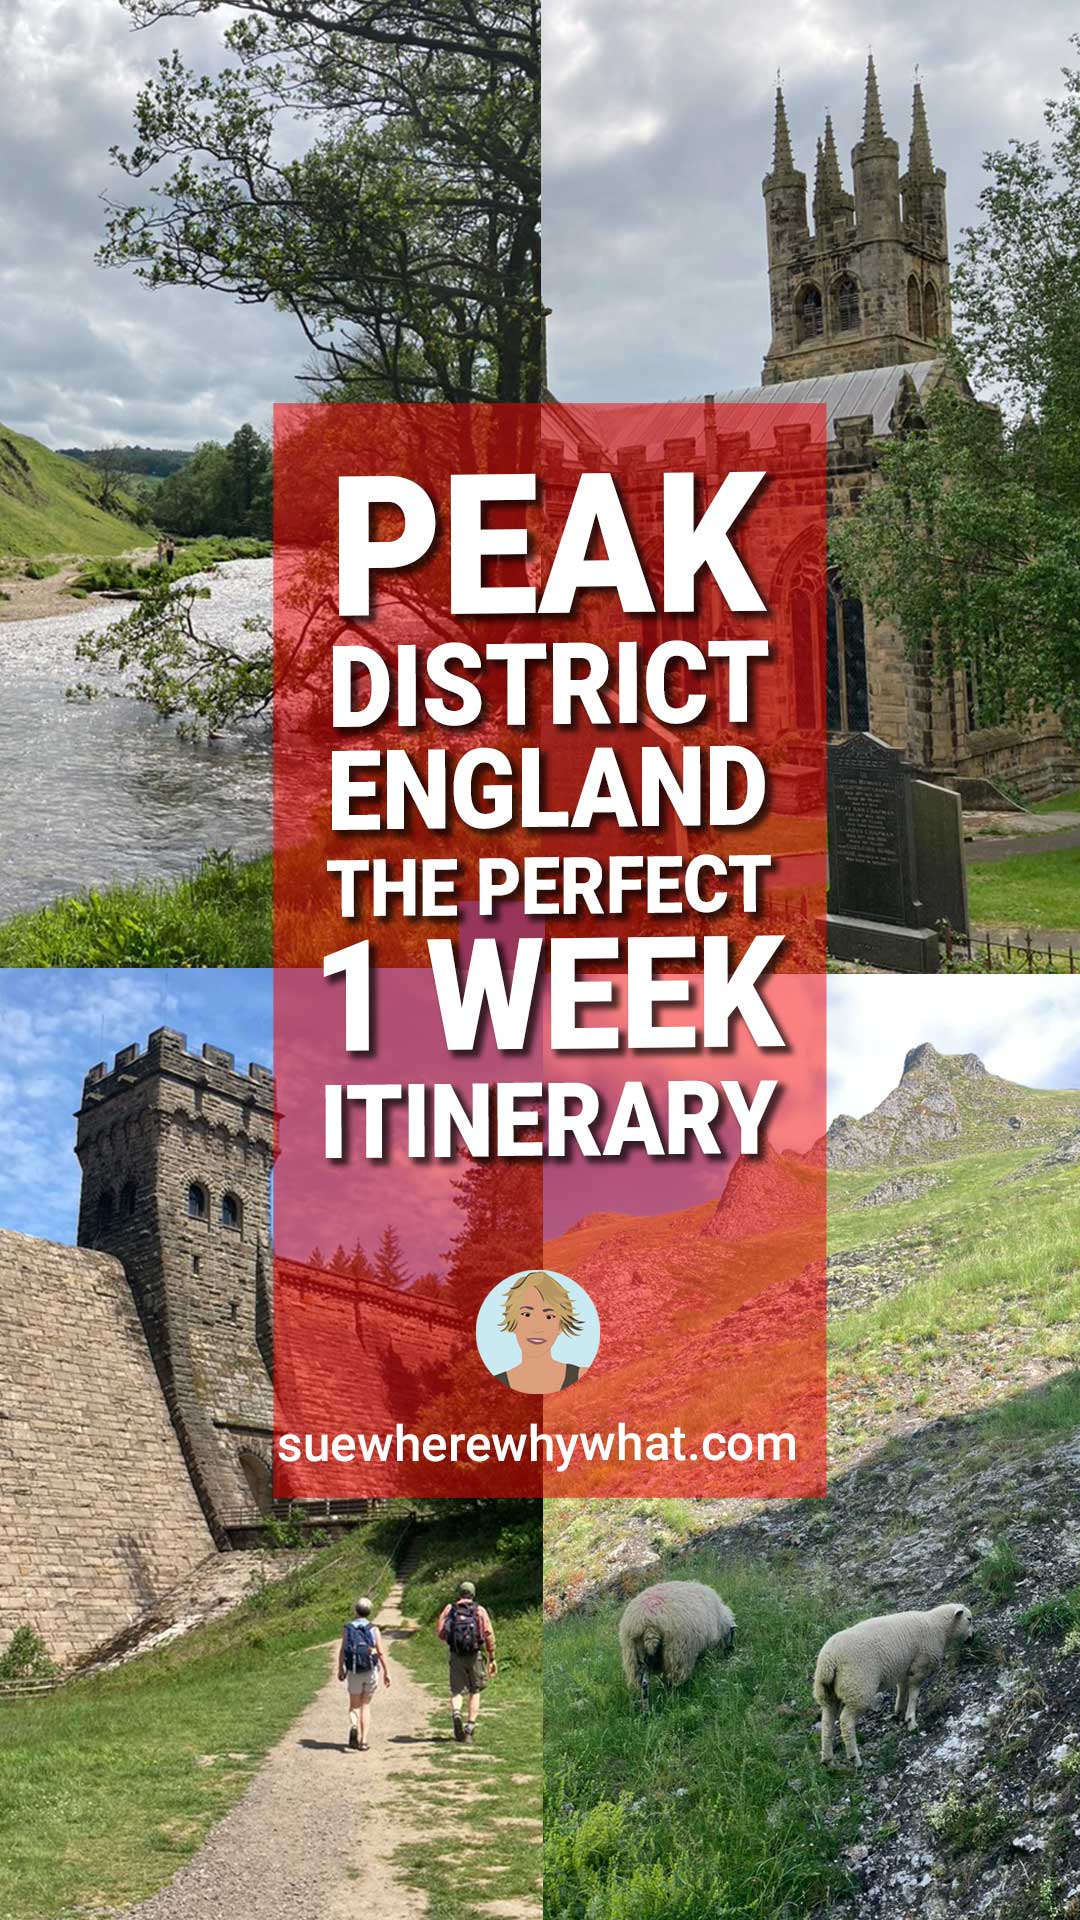 Peak District Itinerary – Your Perfect 6 Day Road Trip